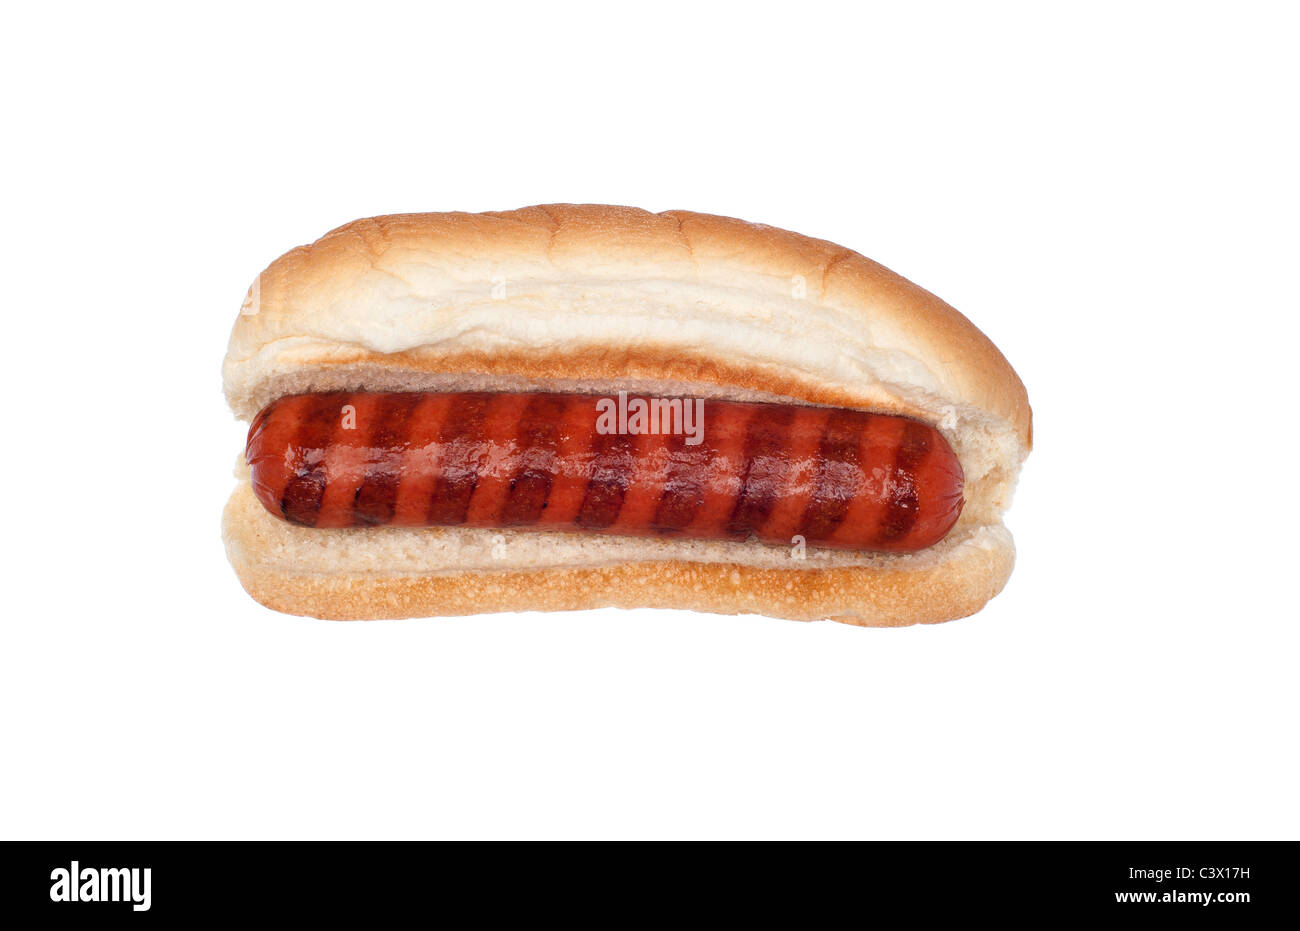 Un hot-dog grillé isolated on white Banque D'Images